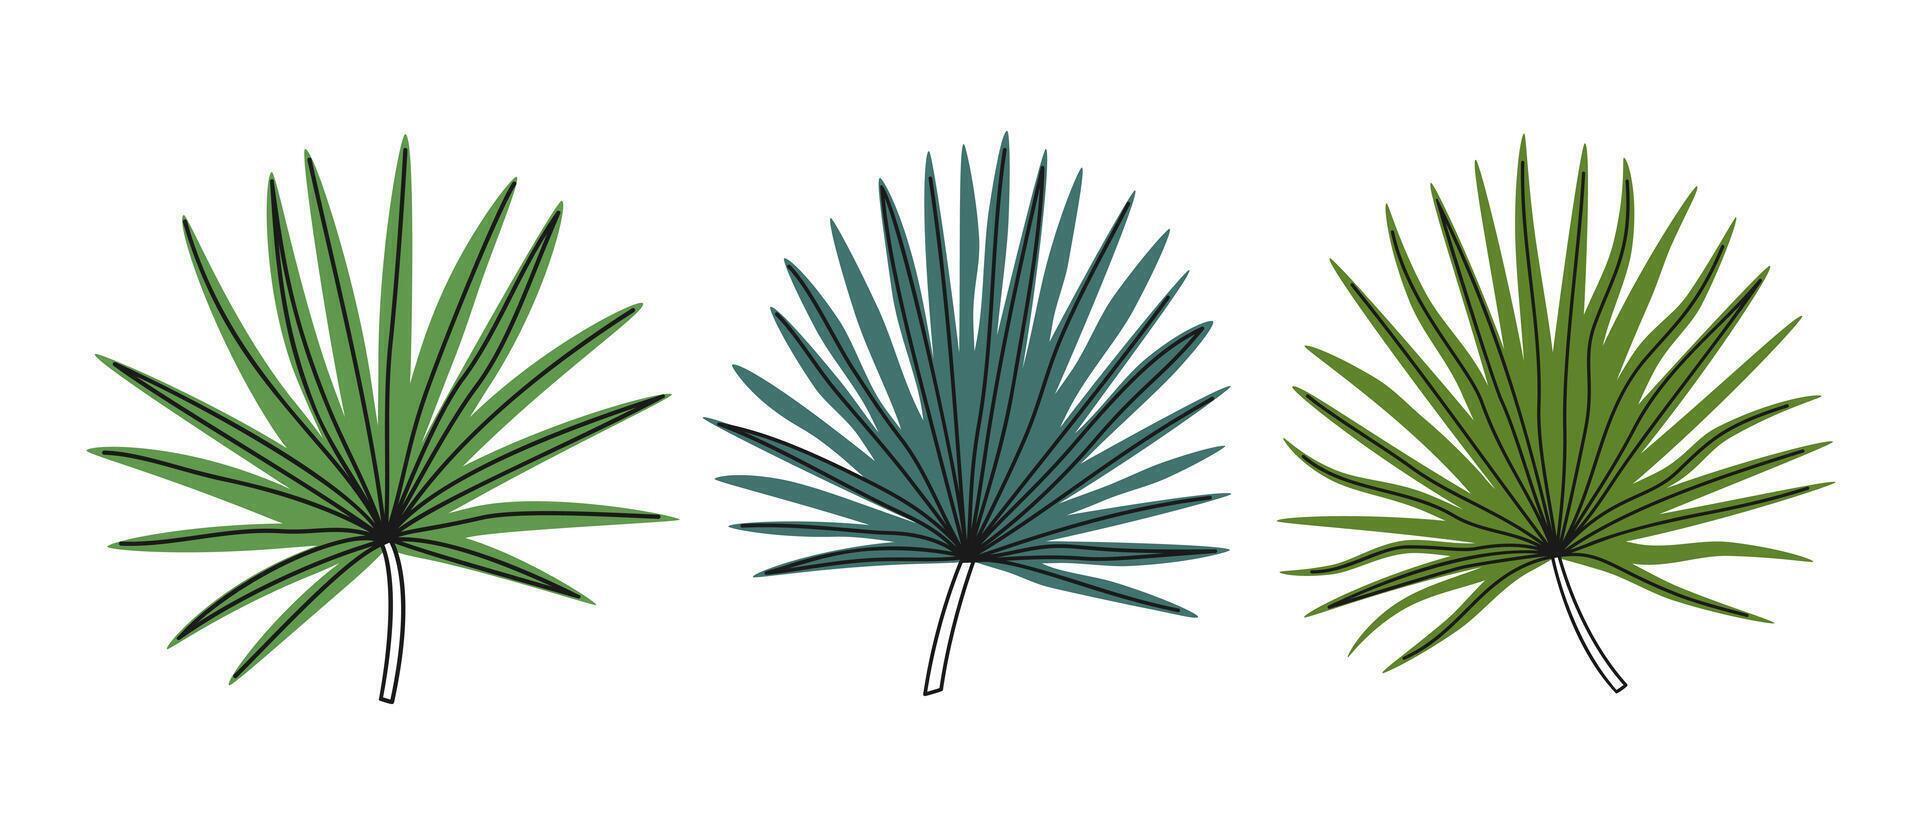 Hand drawn cute summer illustration of palm leaves set. Flat botanical frond elements in simple colored doodle style. Tropical exotic floral icon or print. Isolated on white background. vector